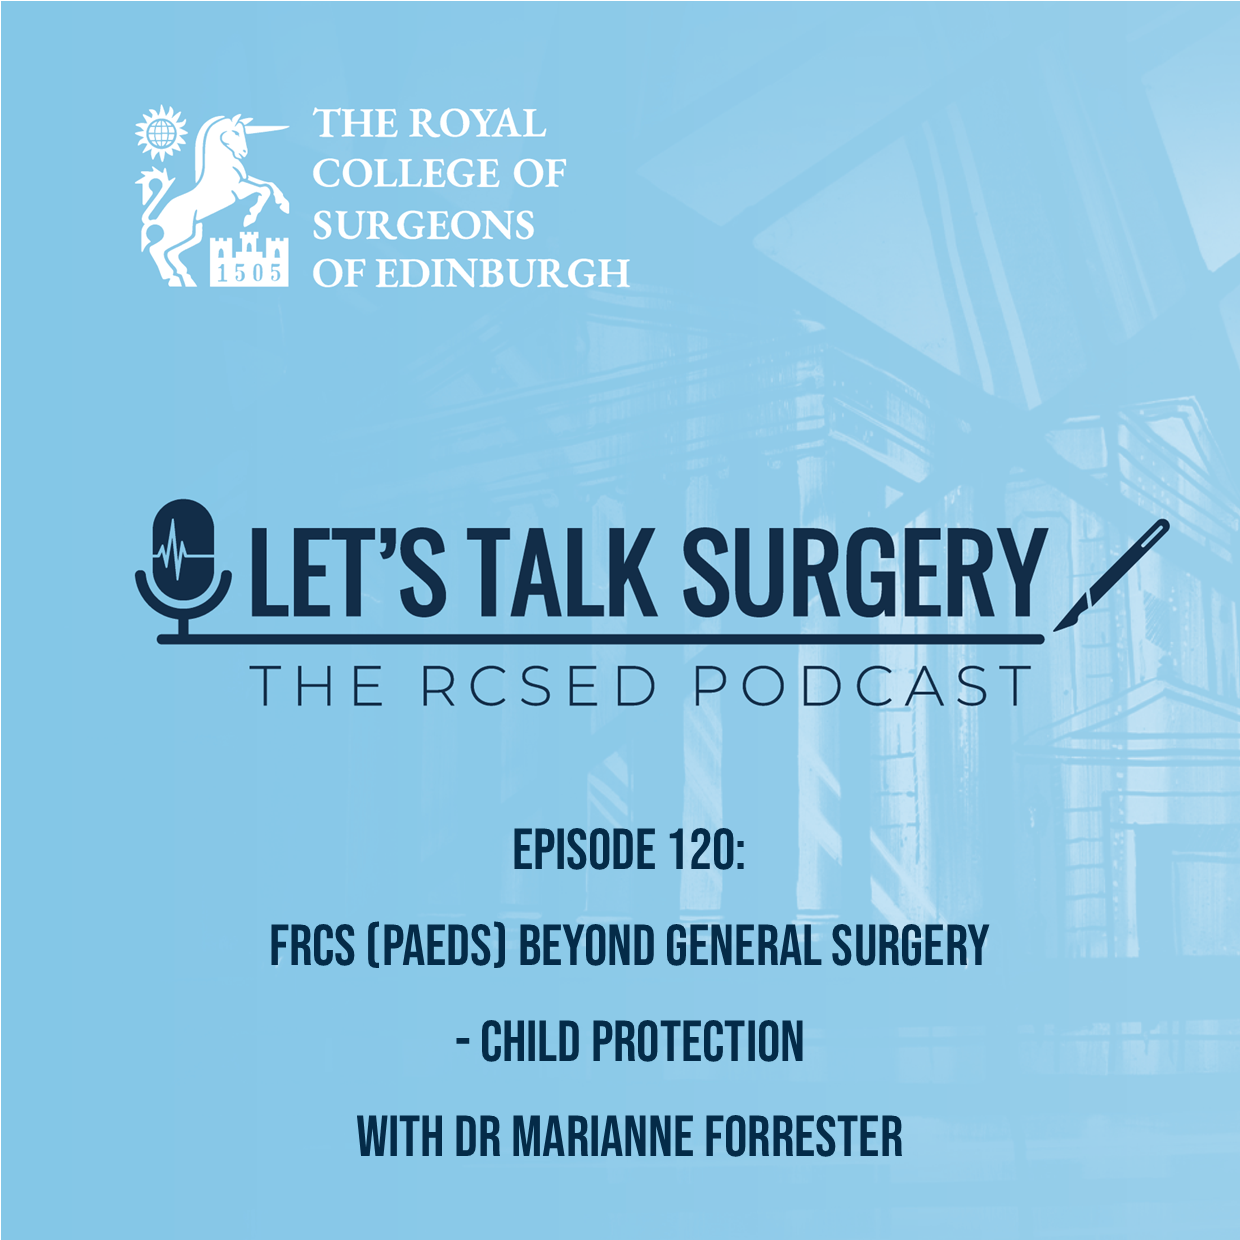 FRCS (Paeds) Beyond General Surgery - Child Protection with Dr Marianne Forrester